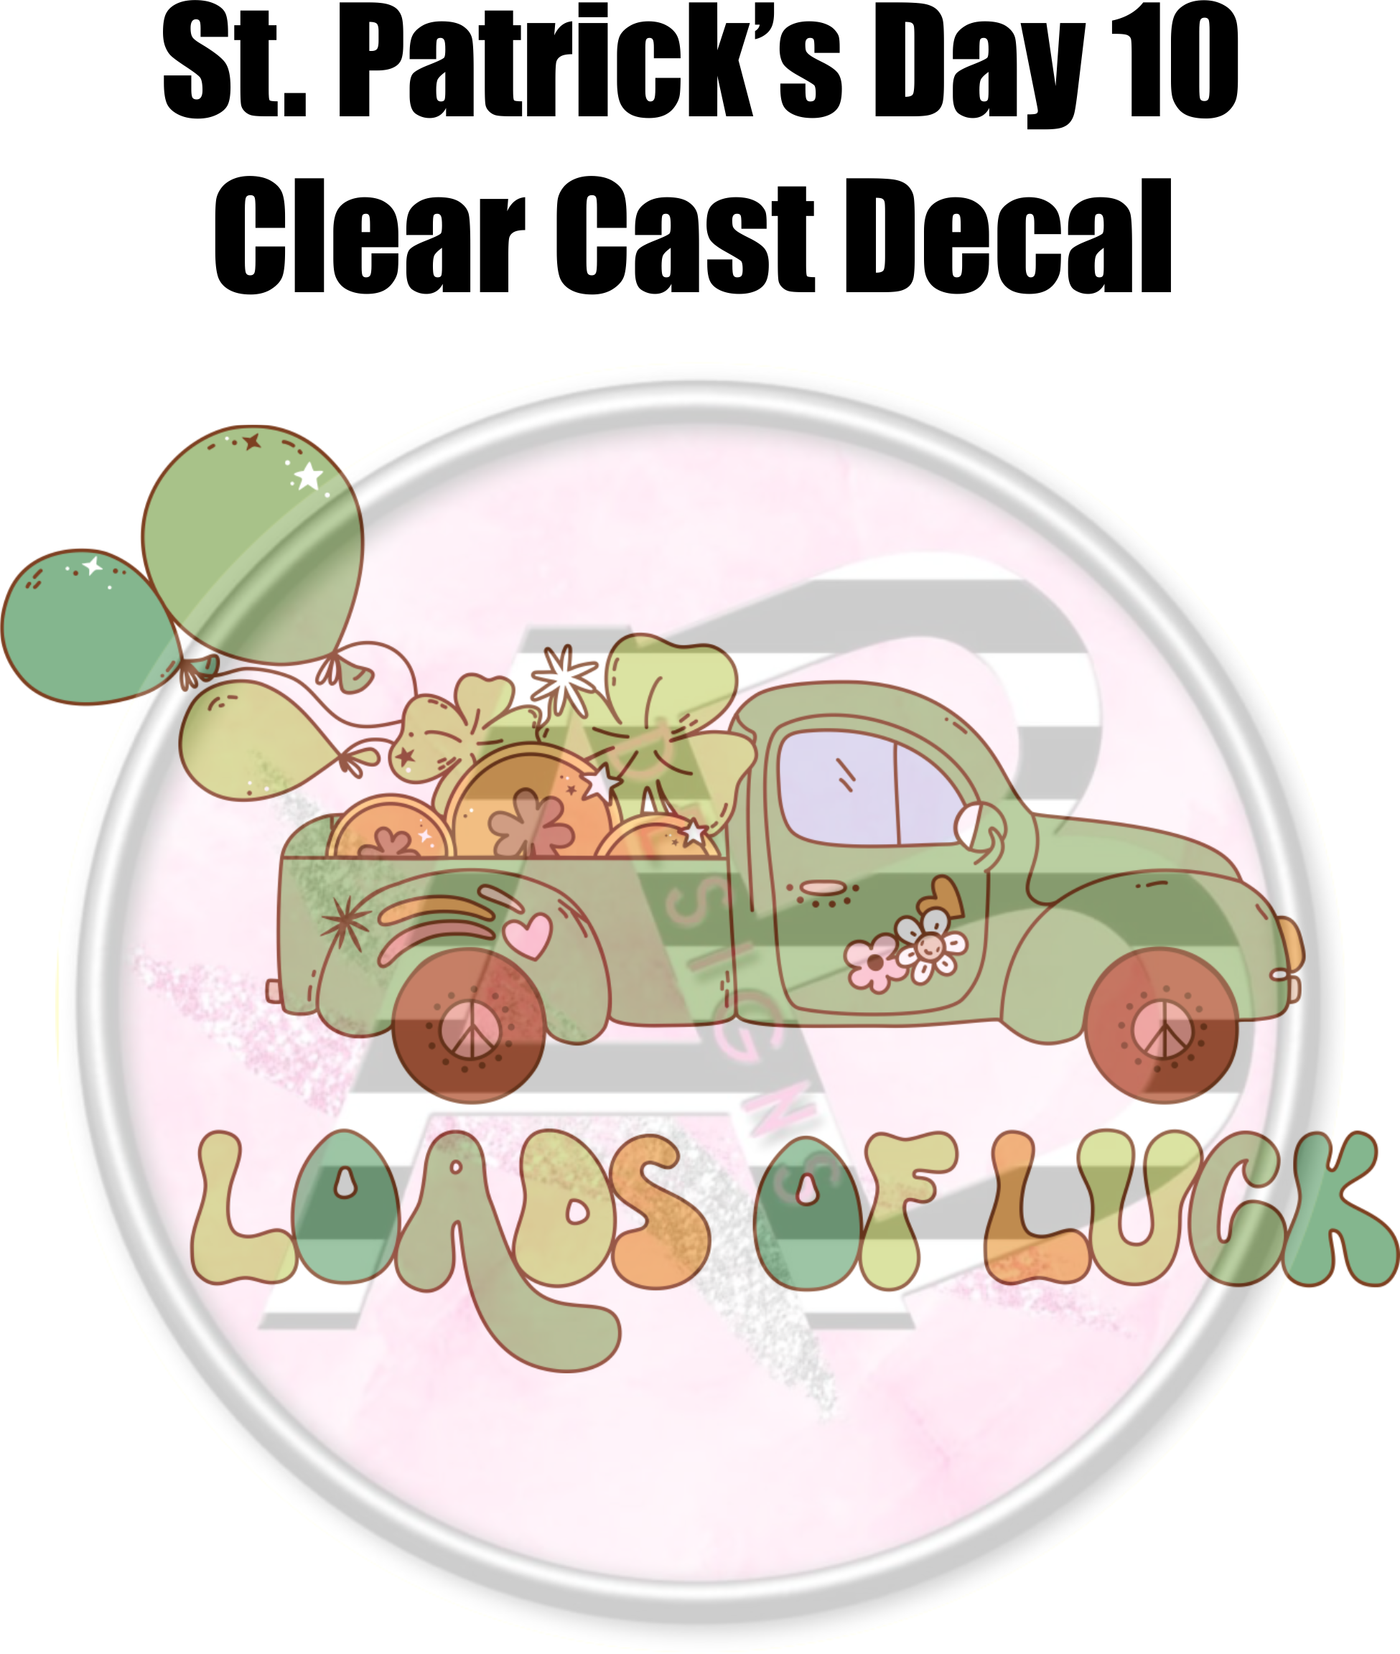 St. Patrick's Day 10 - Clear Cast Decal